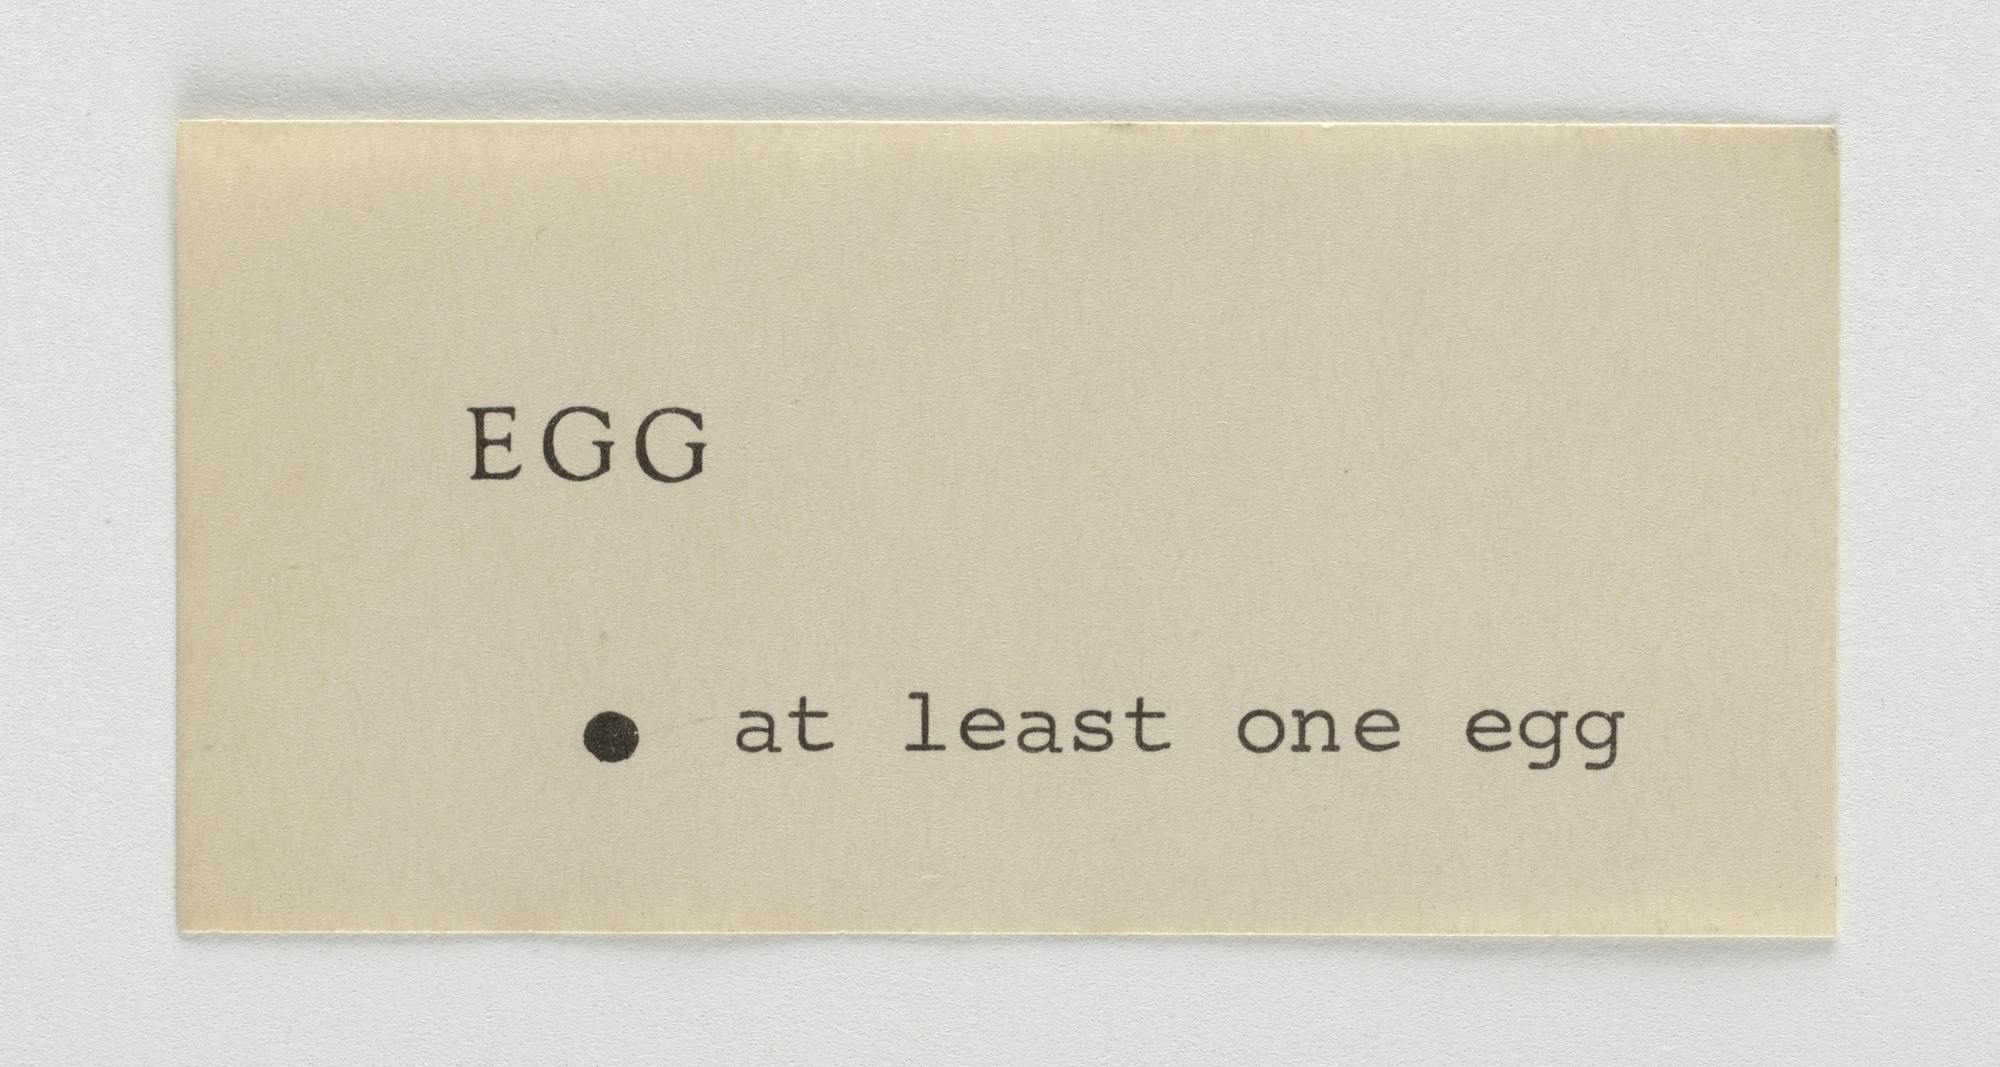 From Event Scores by George Brecht, 1960–61. [A rectangular piece of paper with the text “EGG” and “at least one egg” printed on it.] 